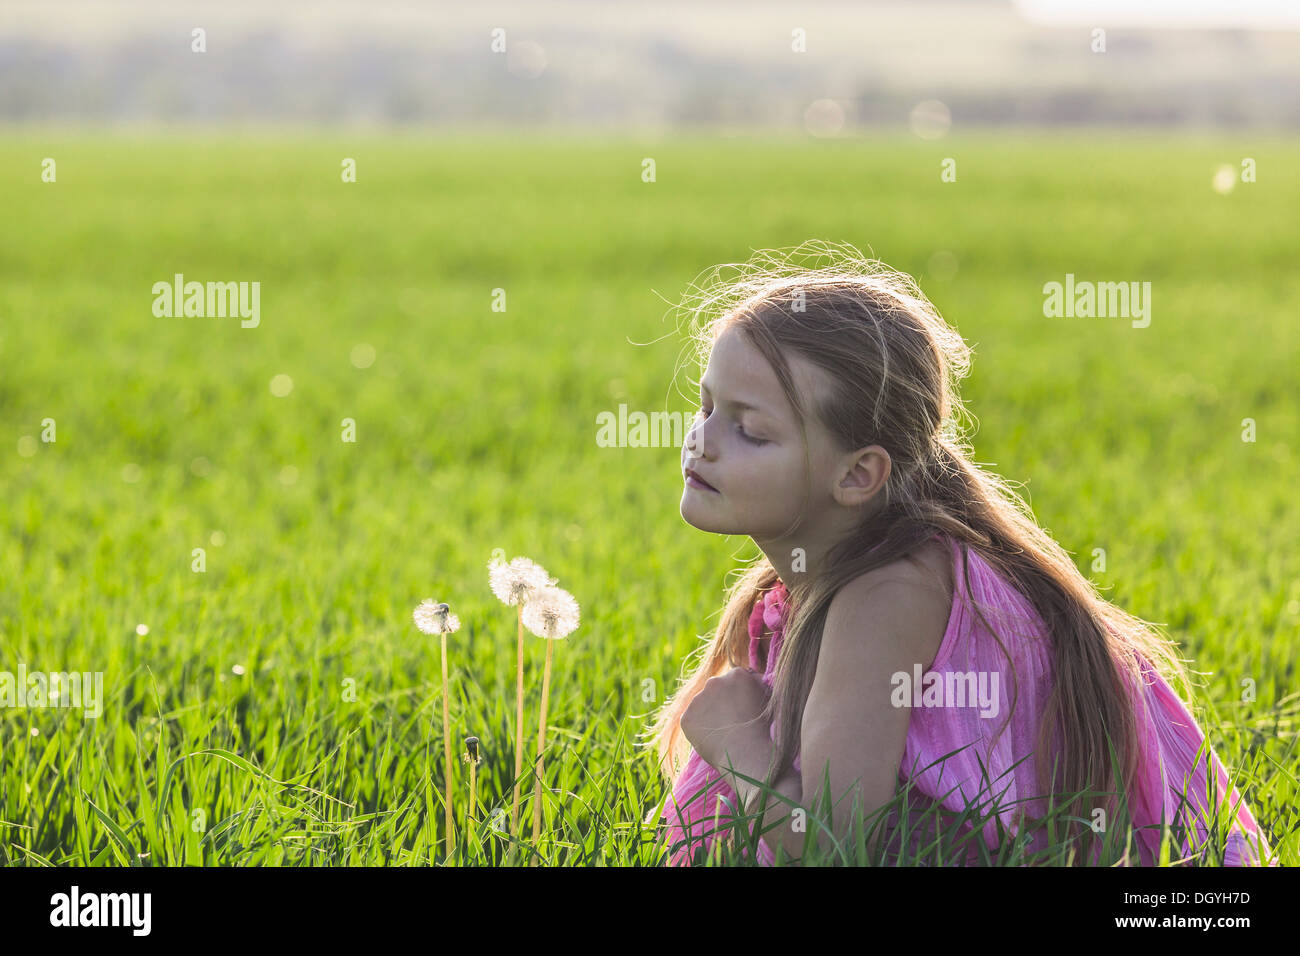 A young girl kneeling down to look curiously at a dandelion in a field Stock Photo